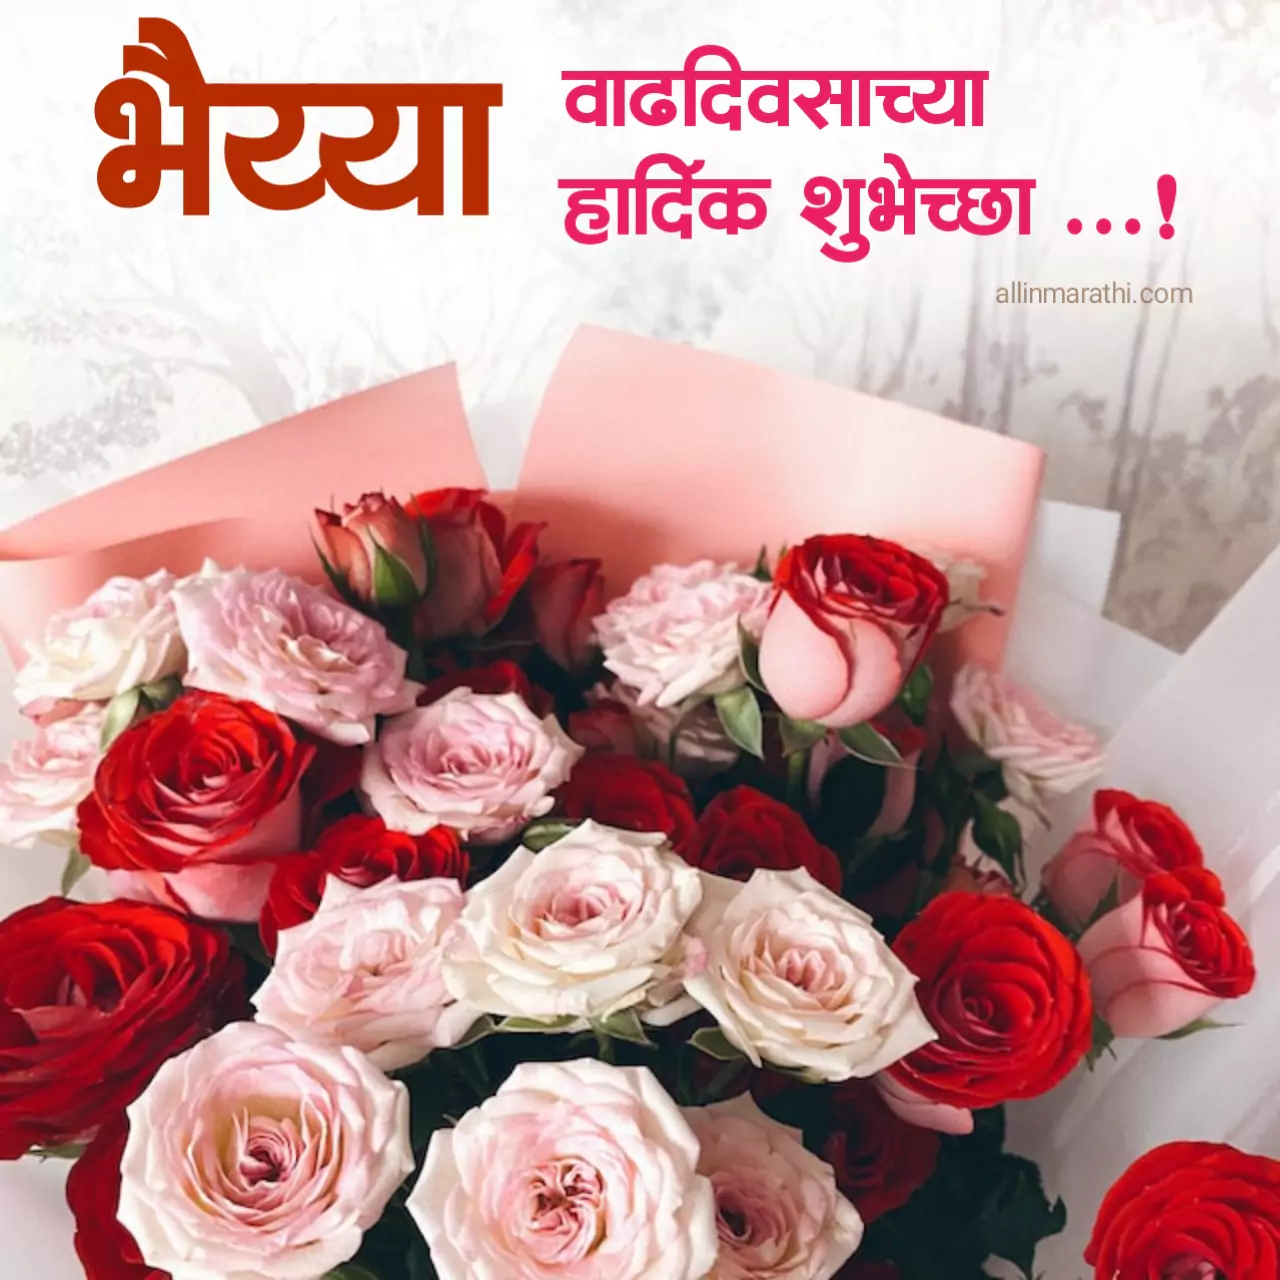 birthday images for son in marathi